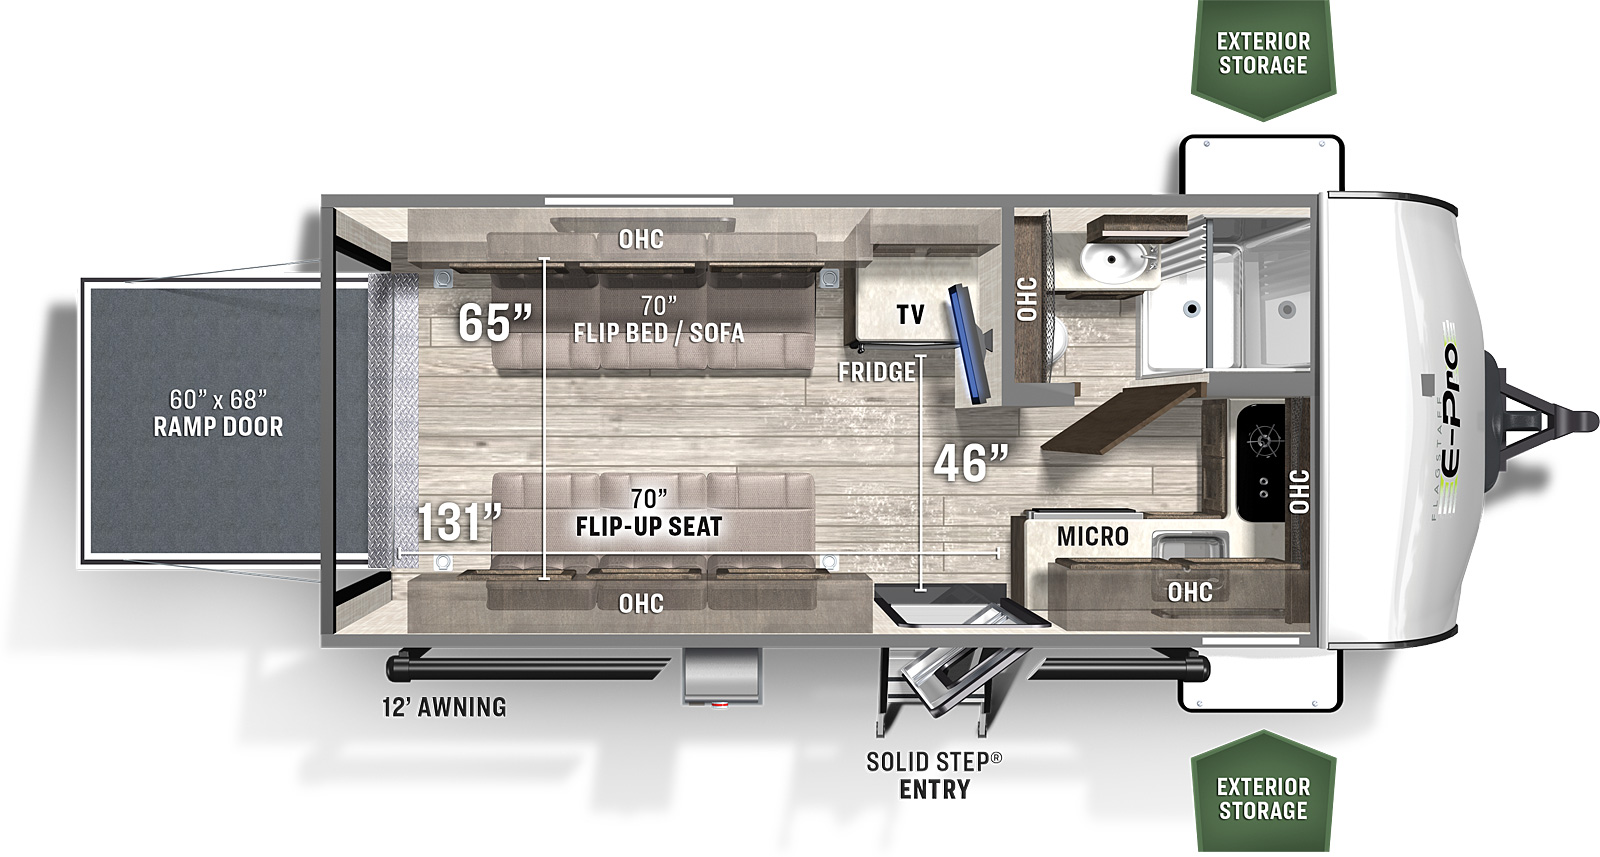 The E19TH-DSO has no slide outs and 1 entry door on the camp side and a 60 by 68 inch rear ramp door. Exterior features include exterior storage and camp side 12 foot awning. Interior layout from front to back: front kitchen in the camp side front corner; full bathroom in the road side front corner; cargo area with 2 flip bed/sofas. Cargo area dimensions are: 131" from the rear of the travel trailer to countertop, 65 inches between the cargo area cabinets and 46 inches between the refrigerator and camp side wall.